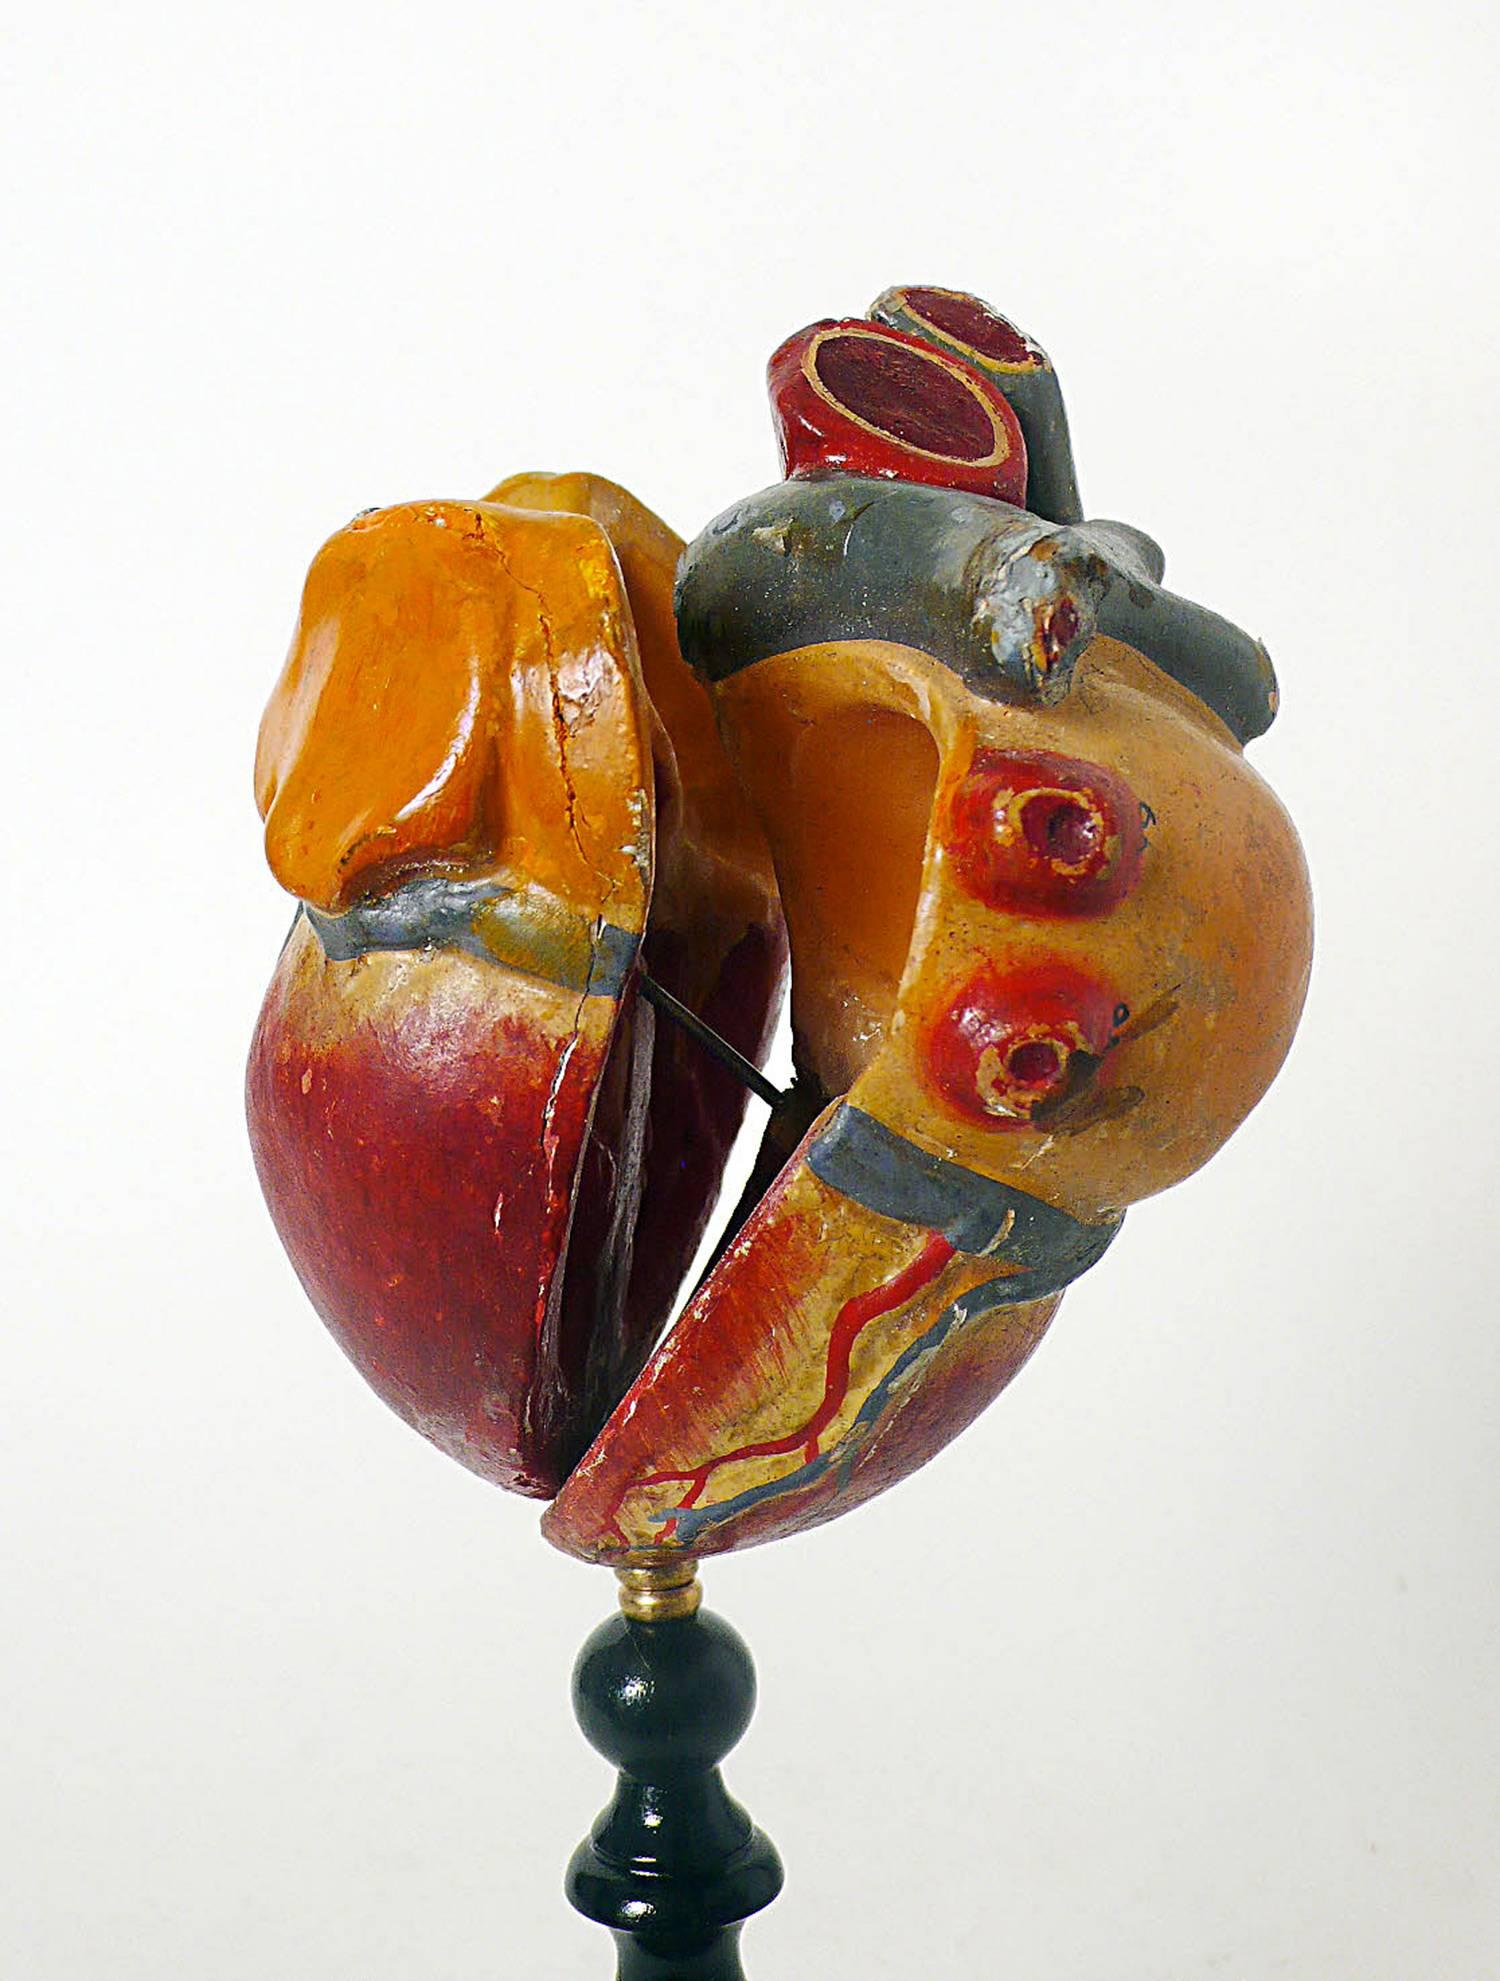 Plaster Anatomic Model for Class Depicting a Human Heart, France, circa 1890